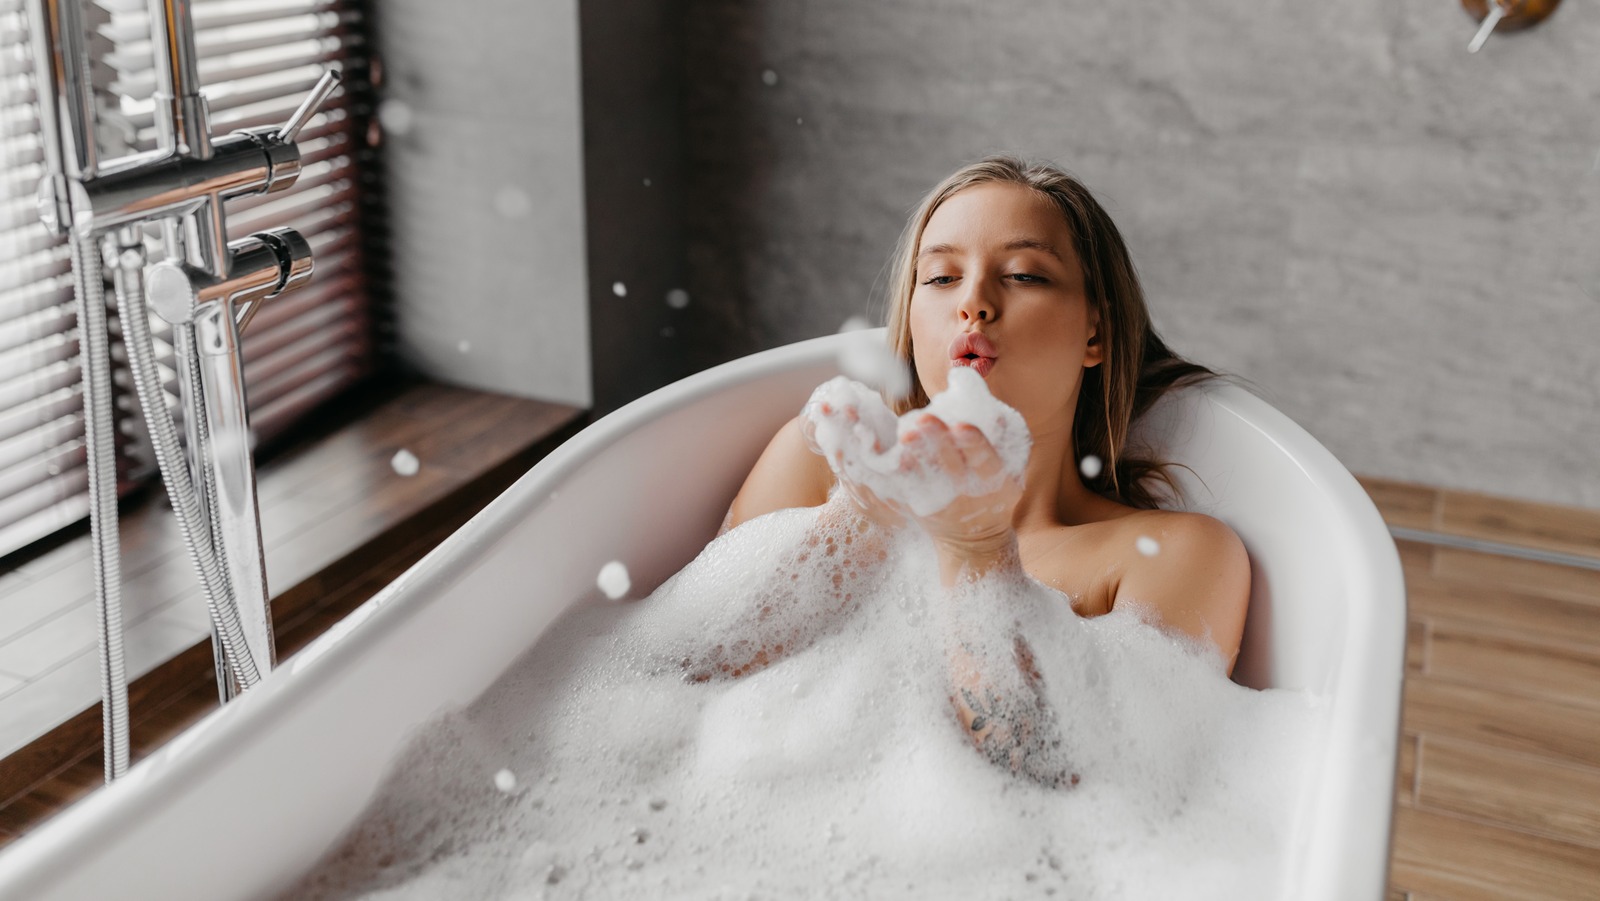 TikTok’s Thursday Night Beauty Routine Trend Is Perhaps The Ultimate Self-Care Ritual – Glam